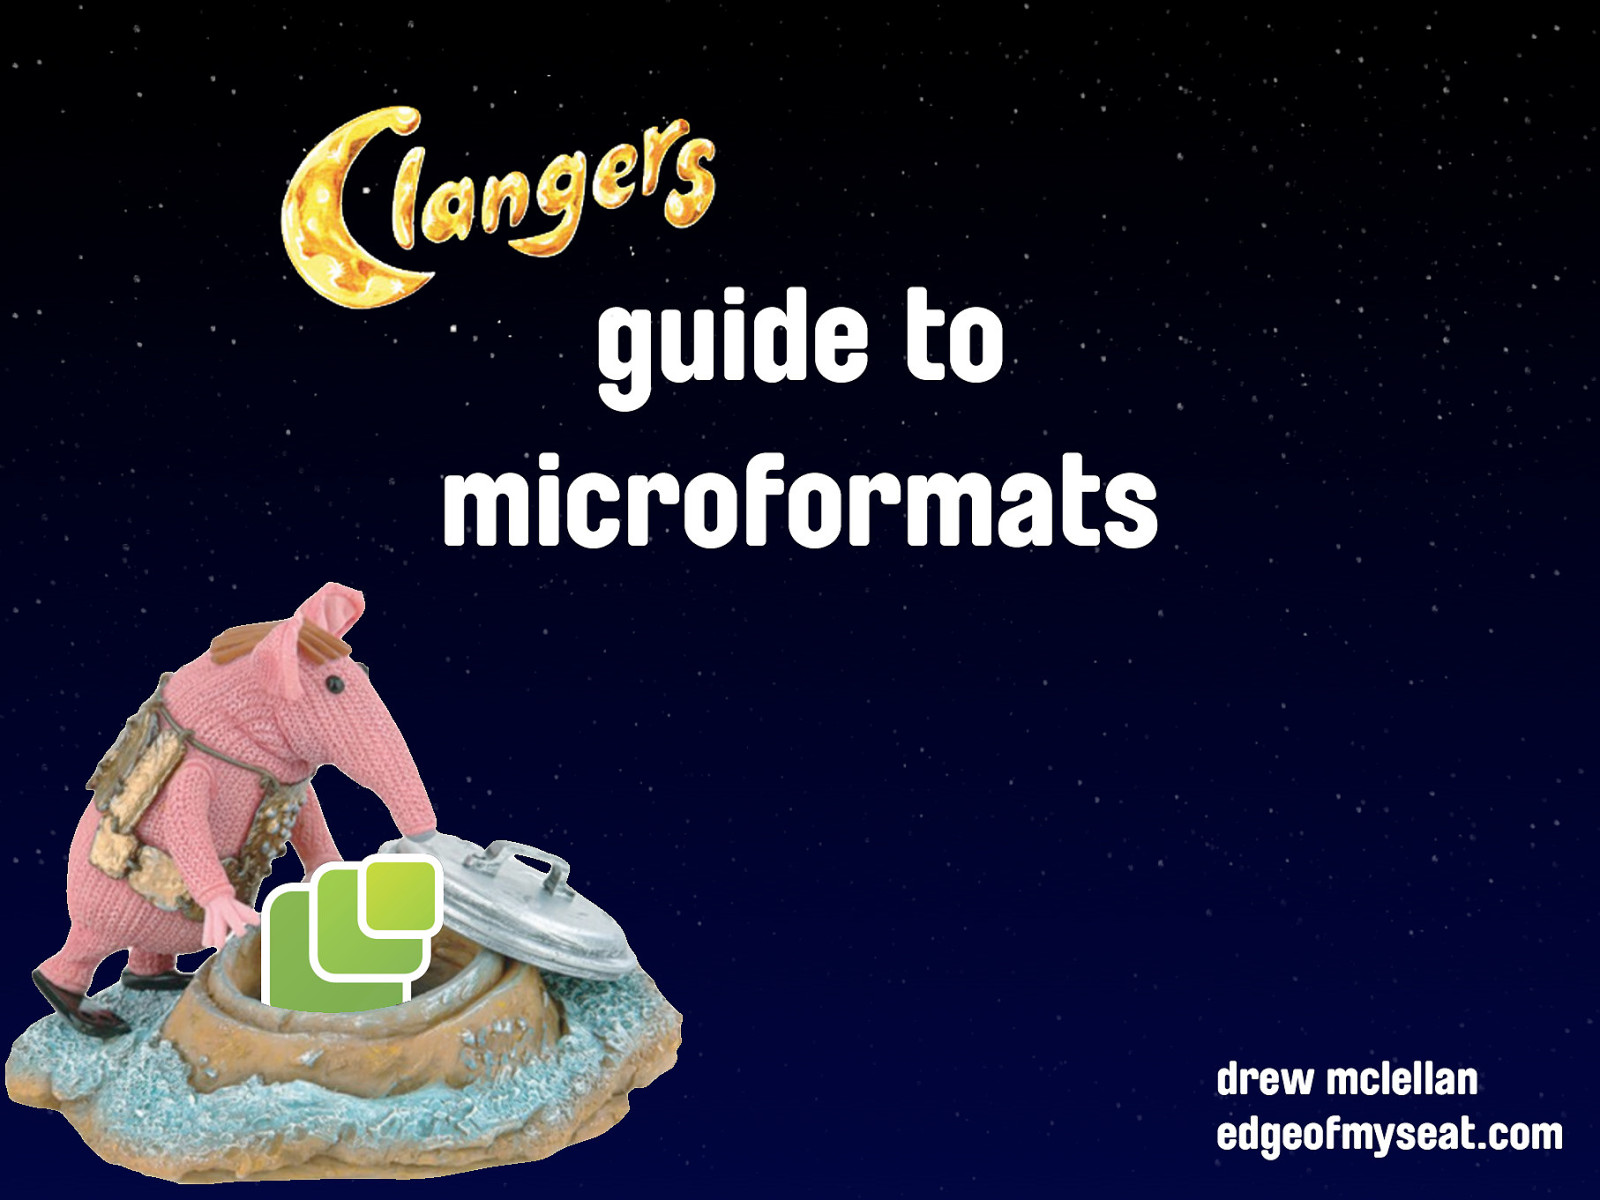 The Clangers Guide to Microformats